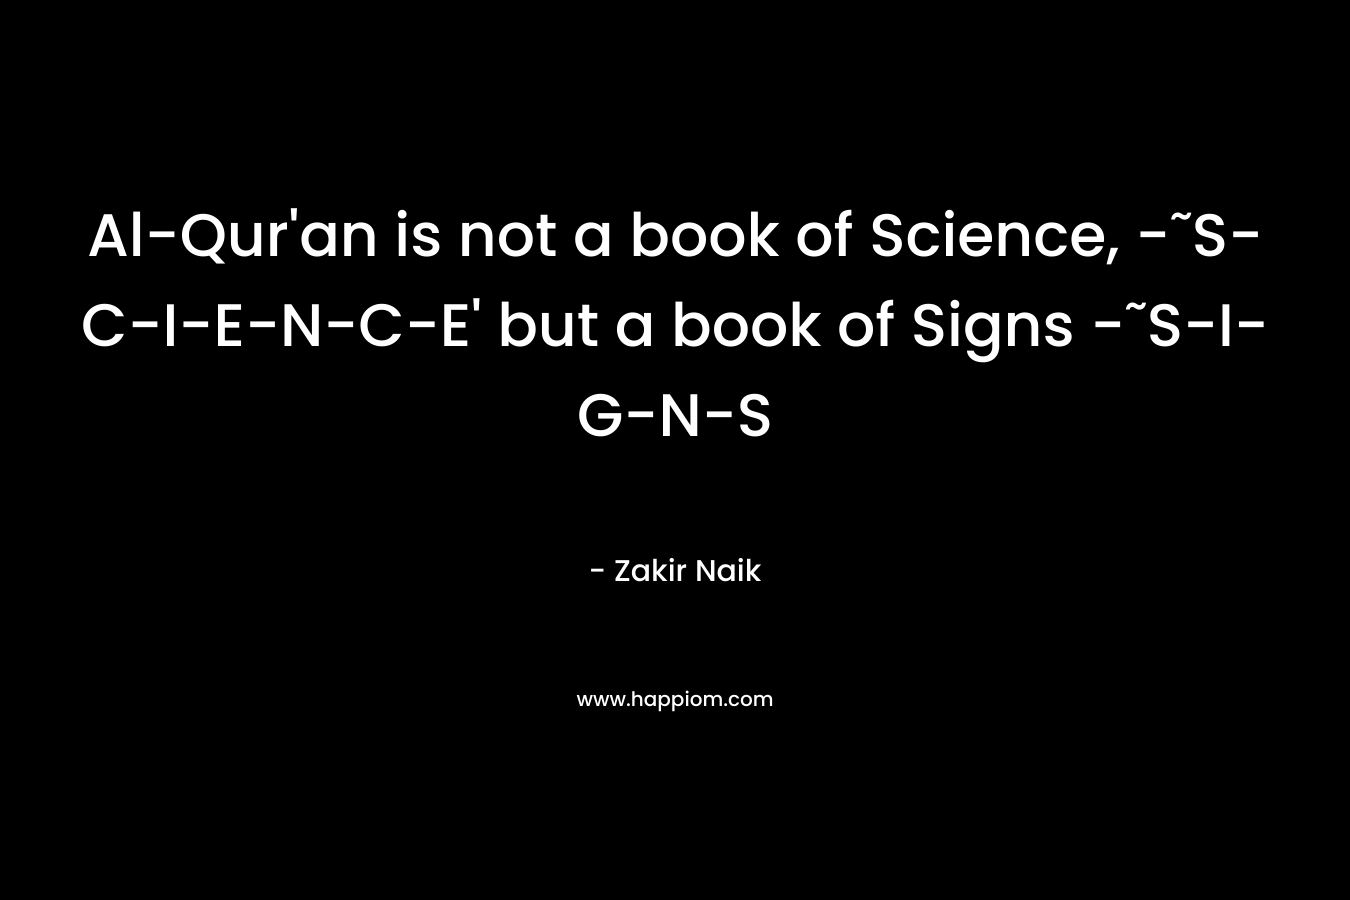 Al-Qur'an is not a book of Science, -˜S-C-I-E-N-C-E' but a book of Signs -˜S-I-G-N-S